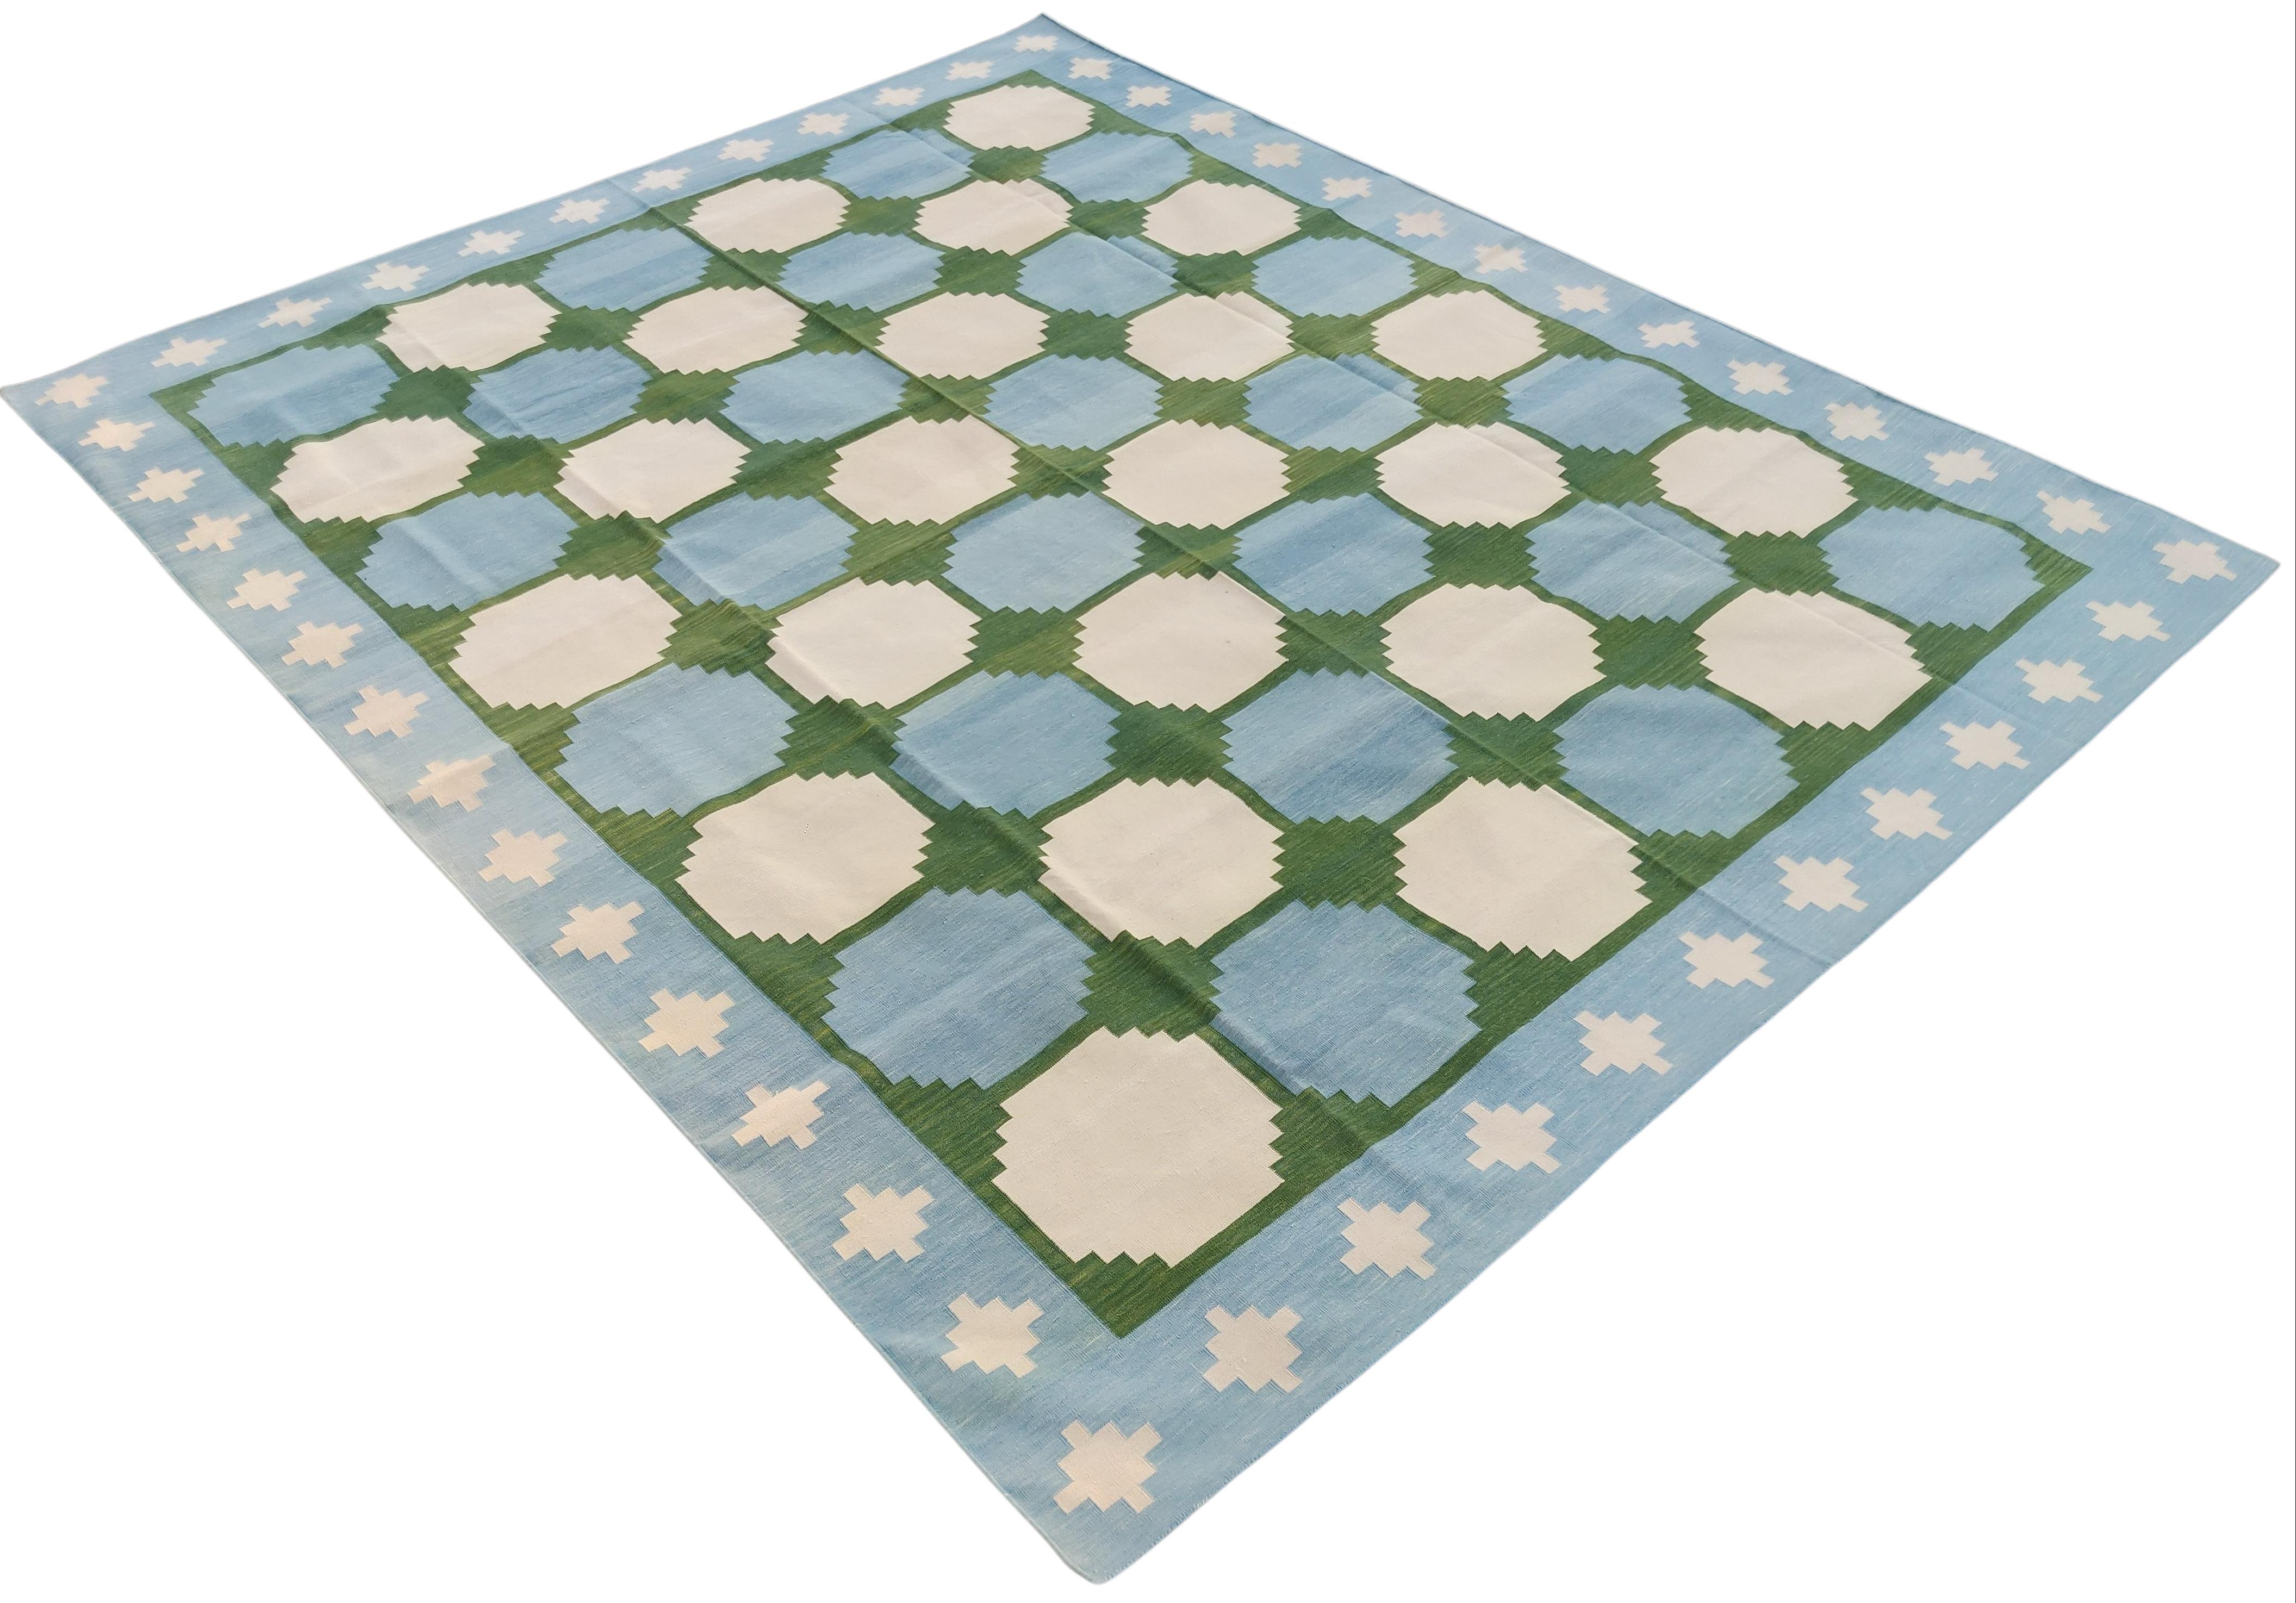 Cotton Natural Vegetable Dyed Forest Green , Sky Blue And Cream Tile Patterned Swedish Rug-4'x6'
These special flat-weave dhurries are hand-woven with 15 ply 100% cotton yarn. Due to the special manufacturing techniques used to create our rugs, the